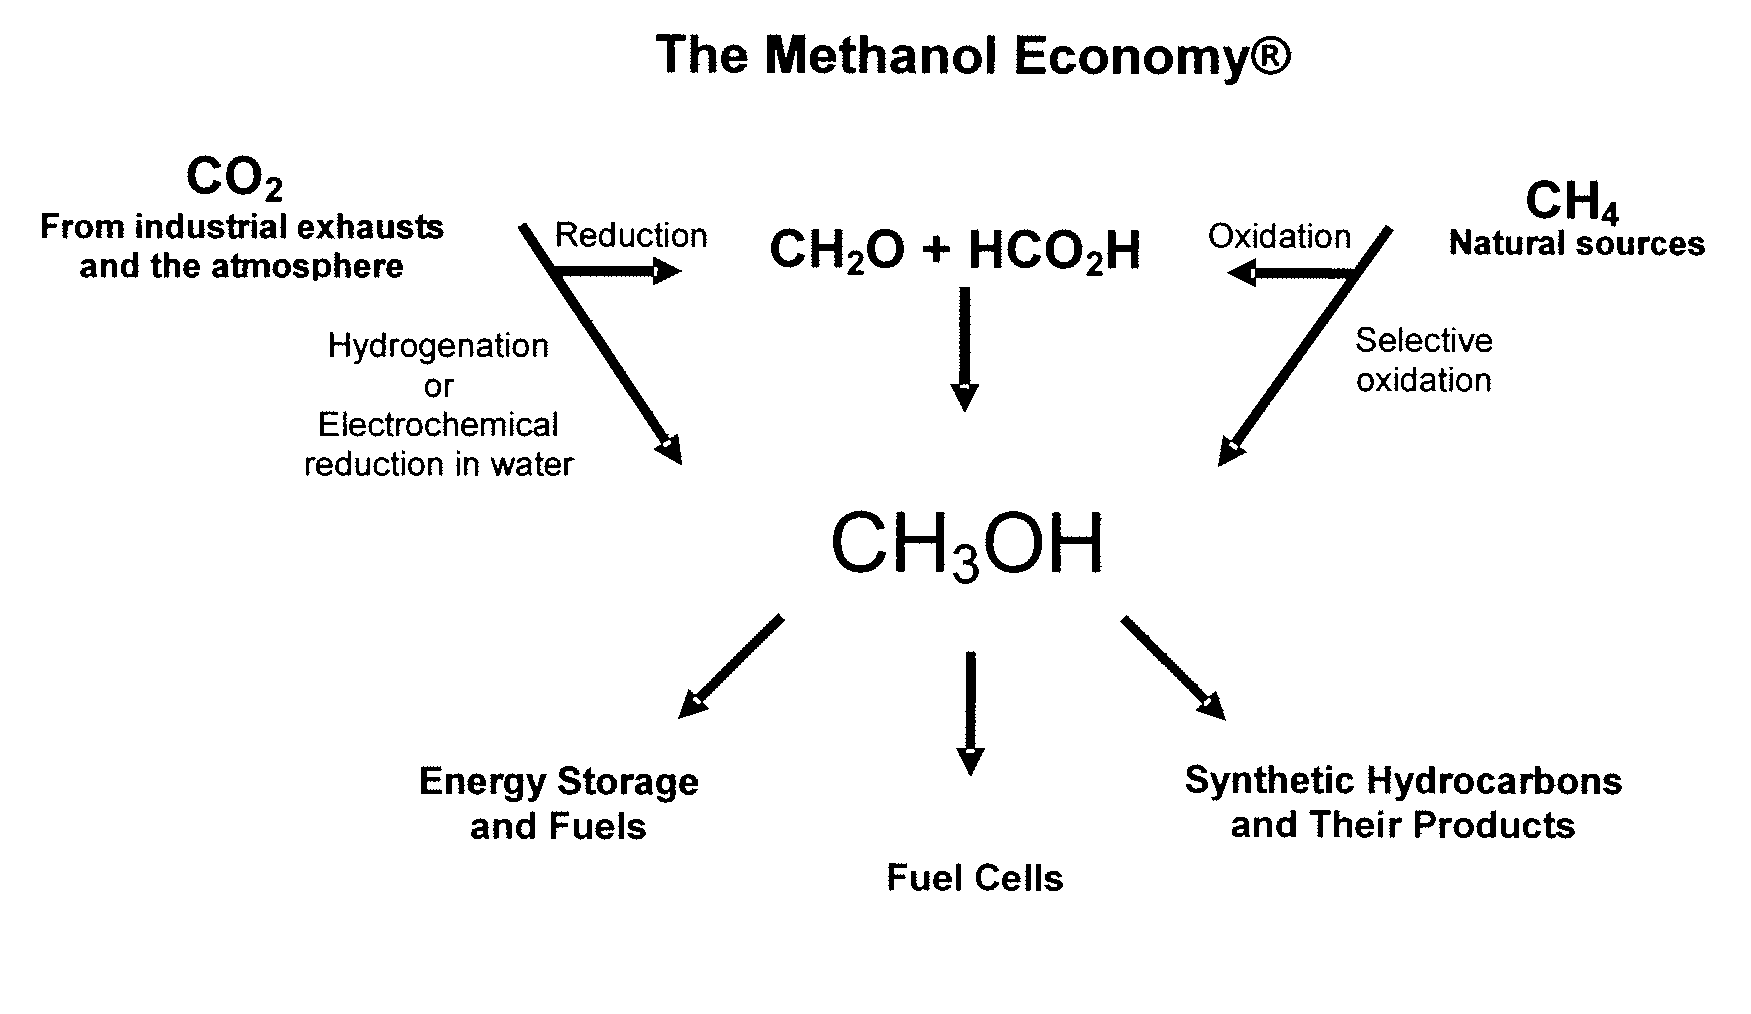 Electrolysis of carbon dioxide in aqueous media to carbon monoxide and hydrogen for production of methanol